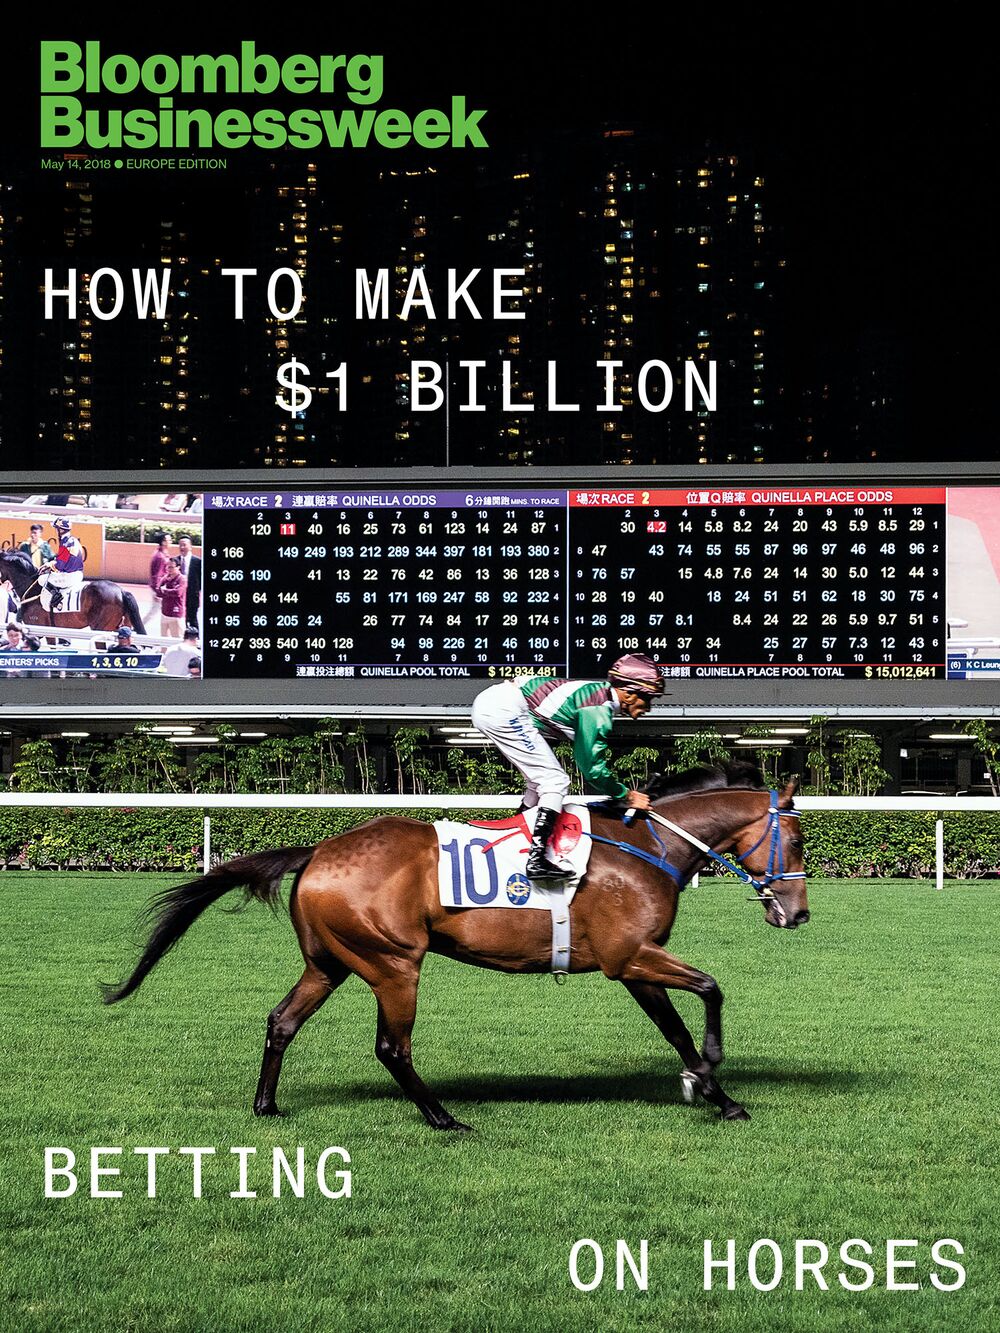 relates to The Gambler Who Cracked the Horse-Racing Code